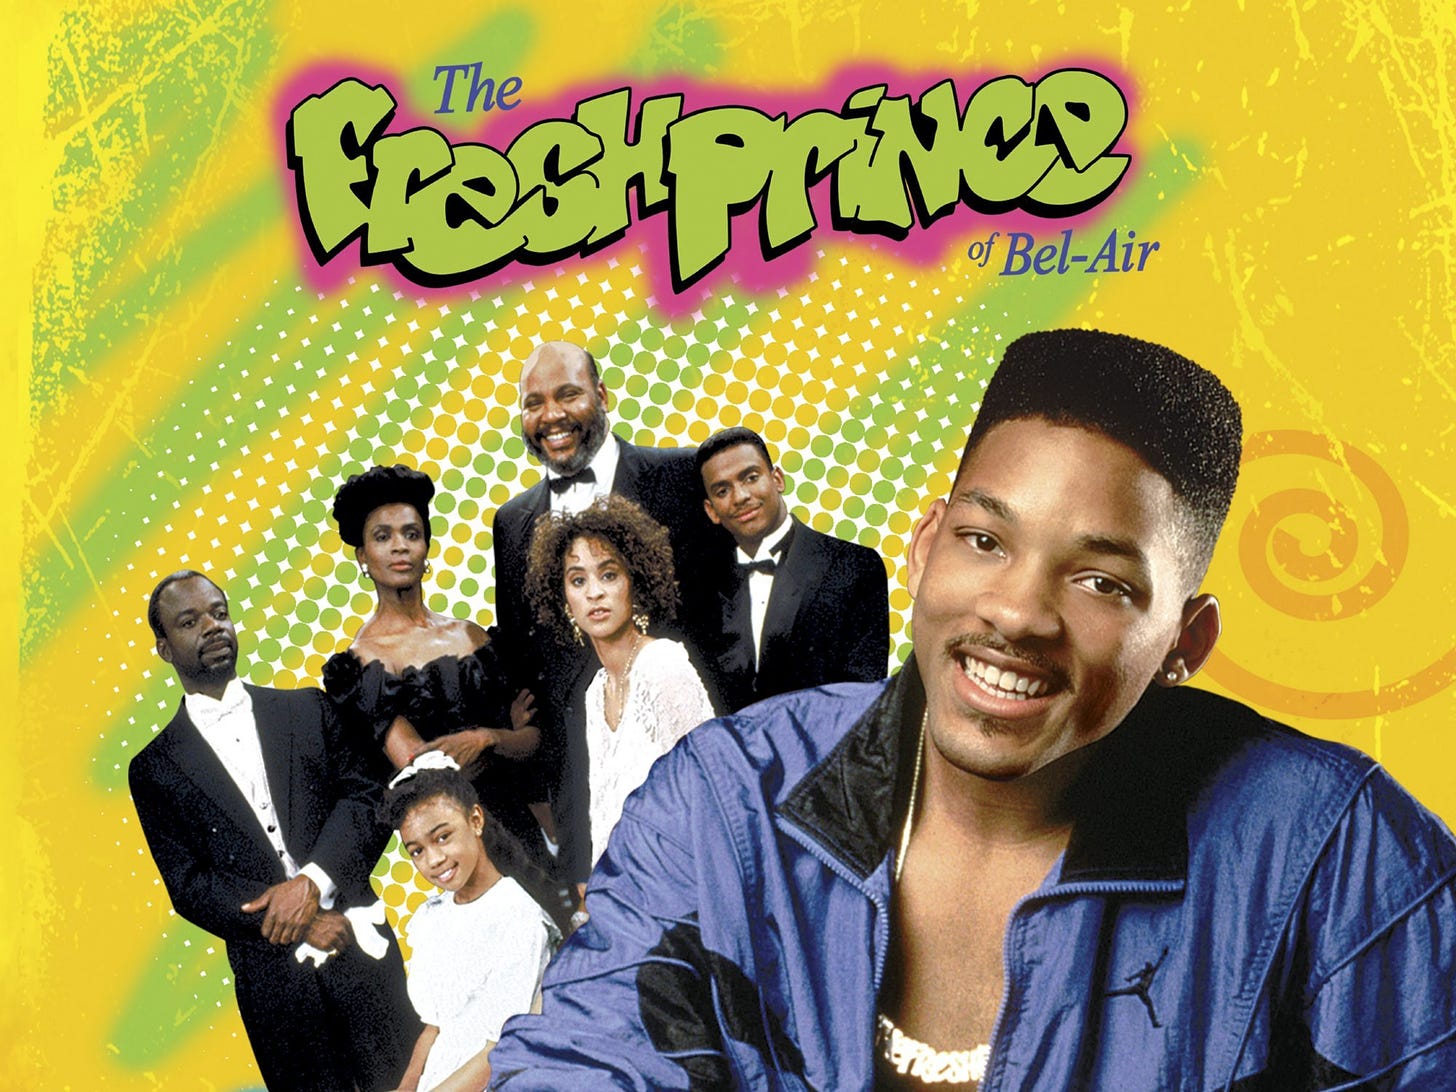 Watch The Fresh Prince of Bel-Air: The Complete First Season | Prime Video